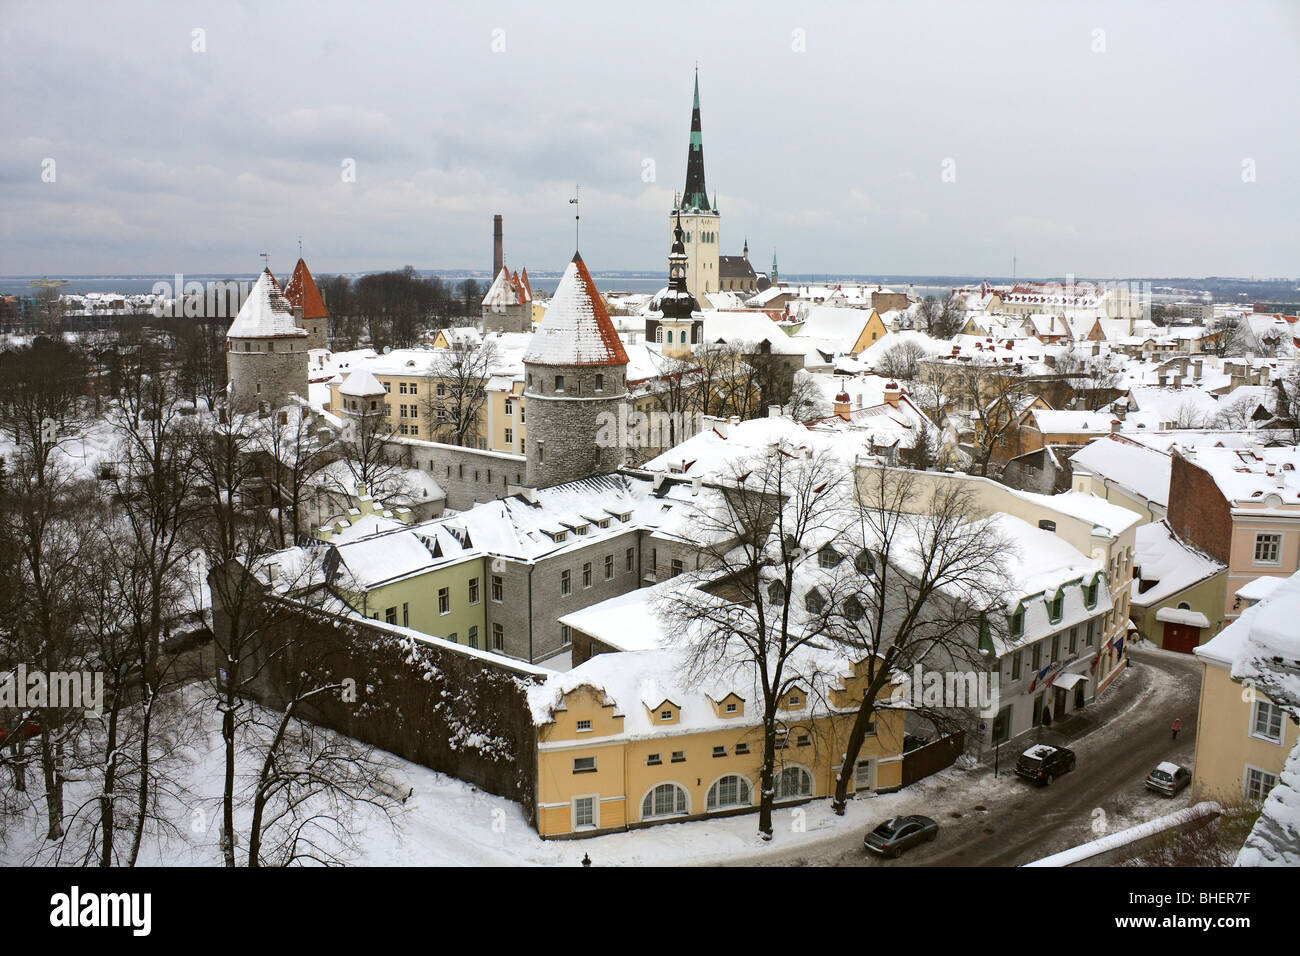 Snow covered roof tops of the Old Town, Tallinn, Estonia. Stock Photo